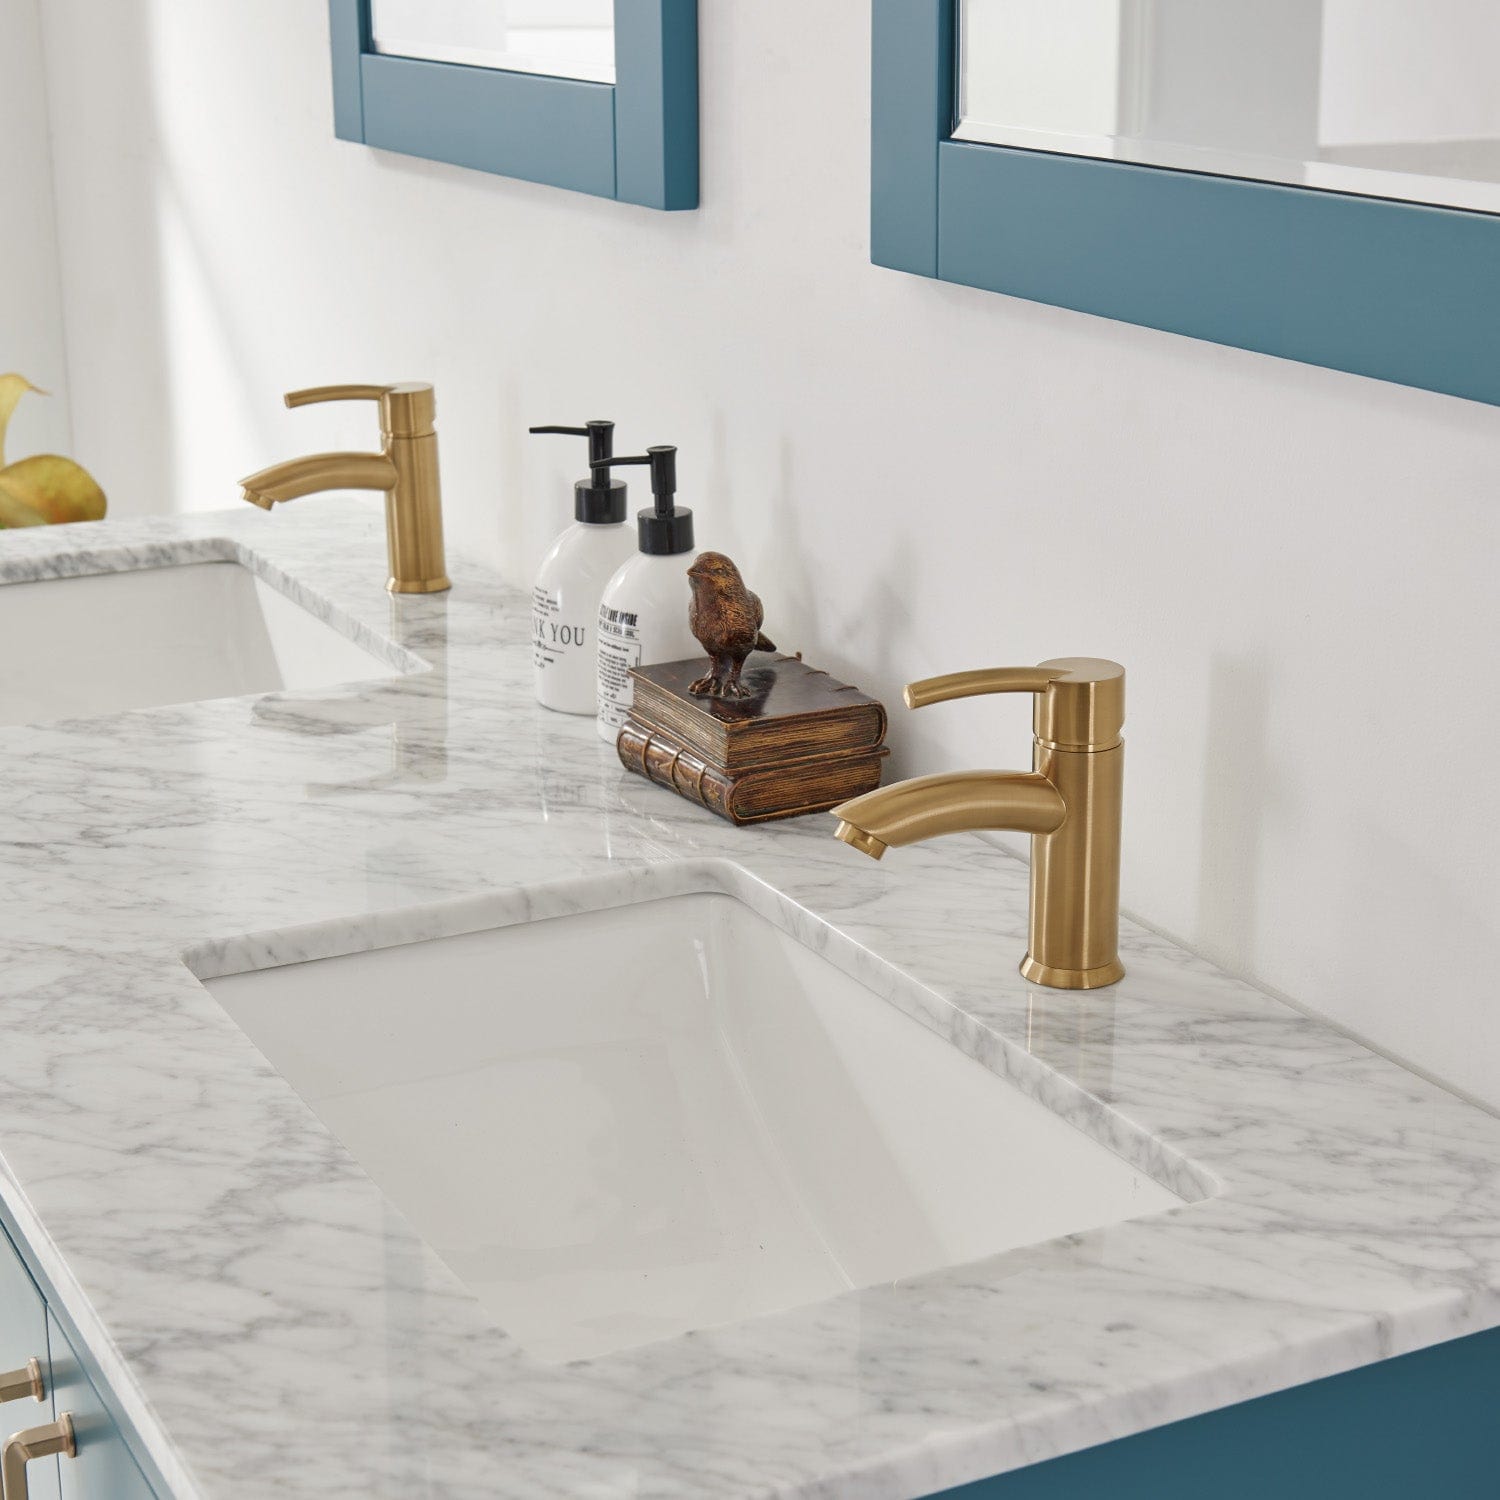 Altair Sutton 60" Double Bathroom Vanity Set in Royal Green and Carrara White Marble Countertop without Mirror 541060-RG-CA-NM - Molaix631112971966Vanity541060-RG-CA-NM